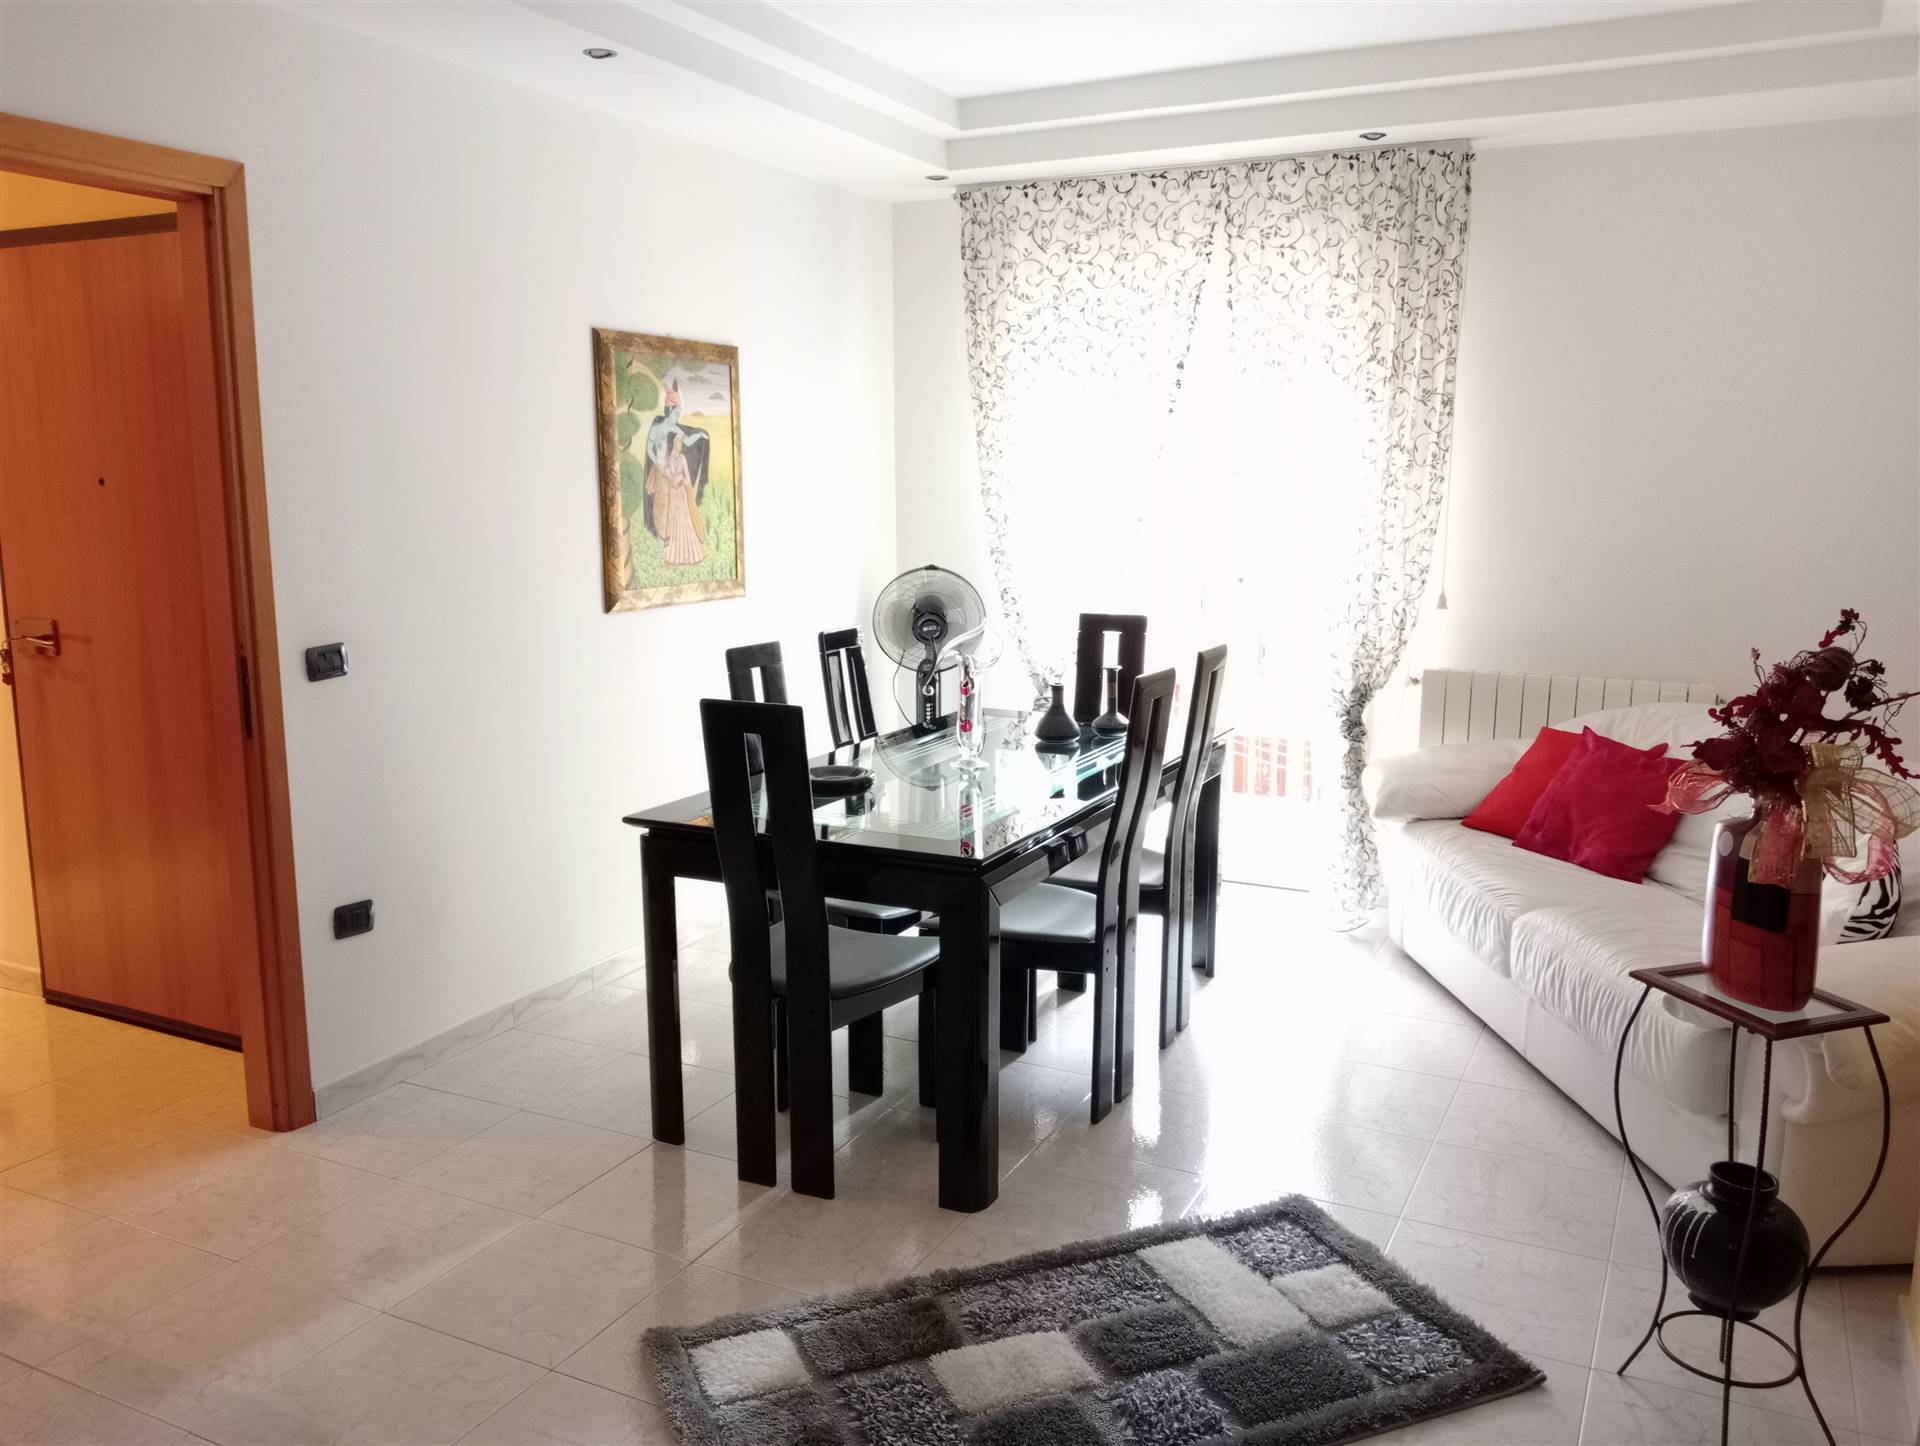 CENTRO, LICATA, Apartment for sale of 95 Sq. mt., Habitable, Heating Individual heating system, Energetic class: G, Epi: 228,8 kwh/m2 year, placed at 